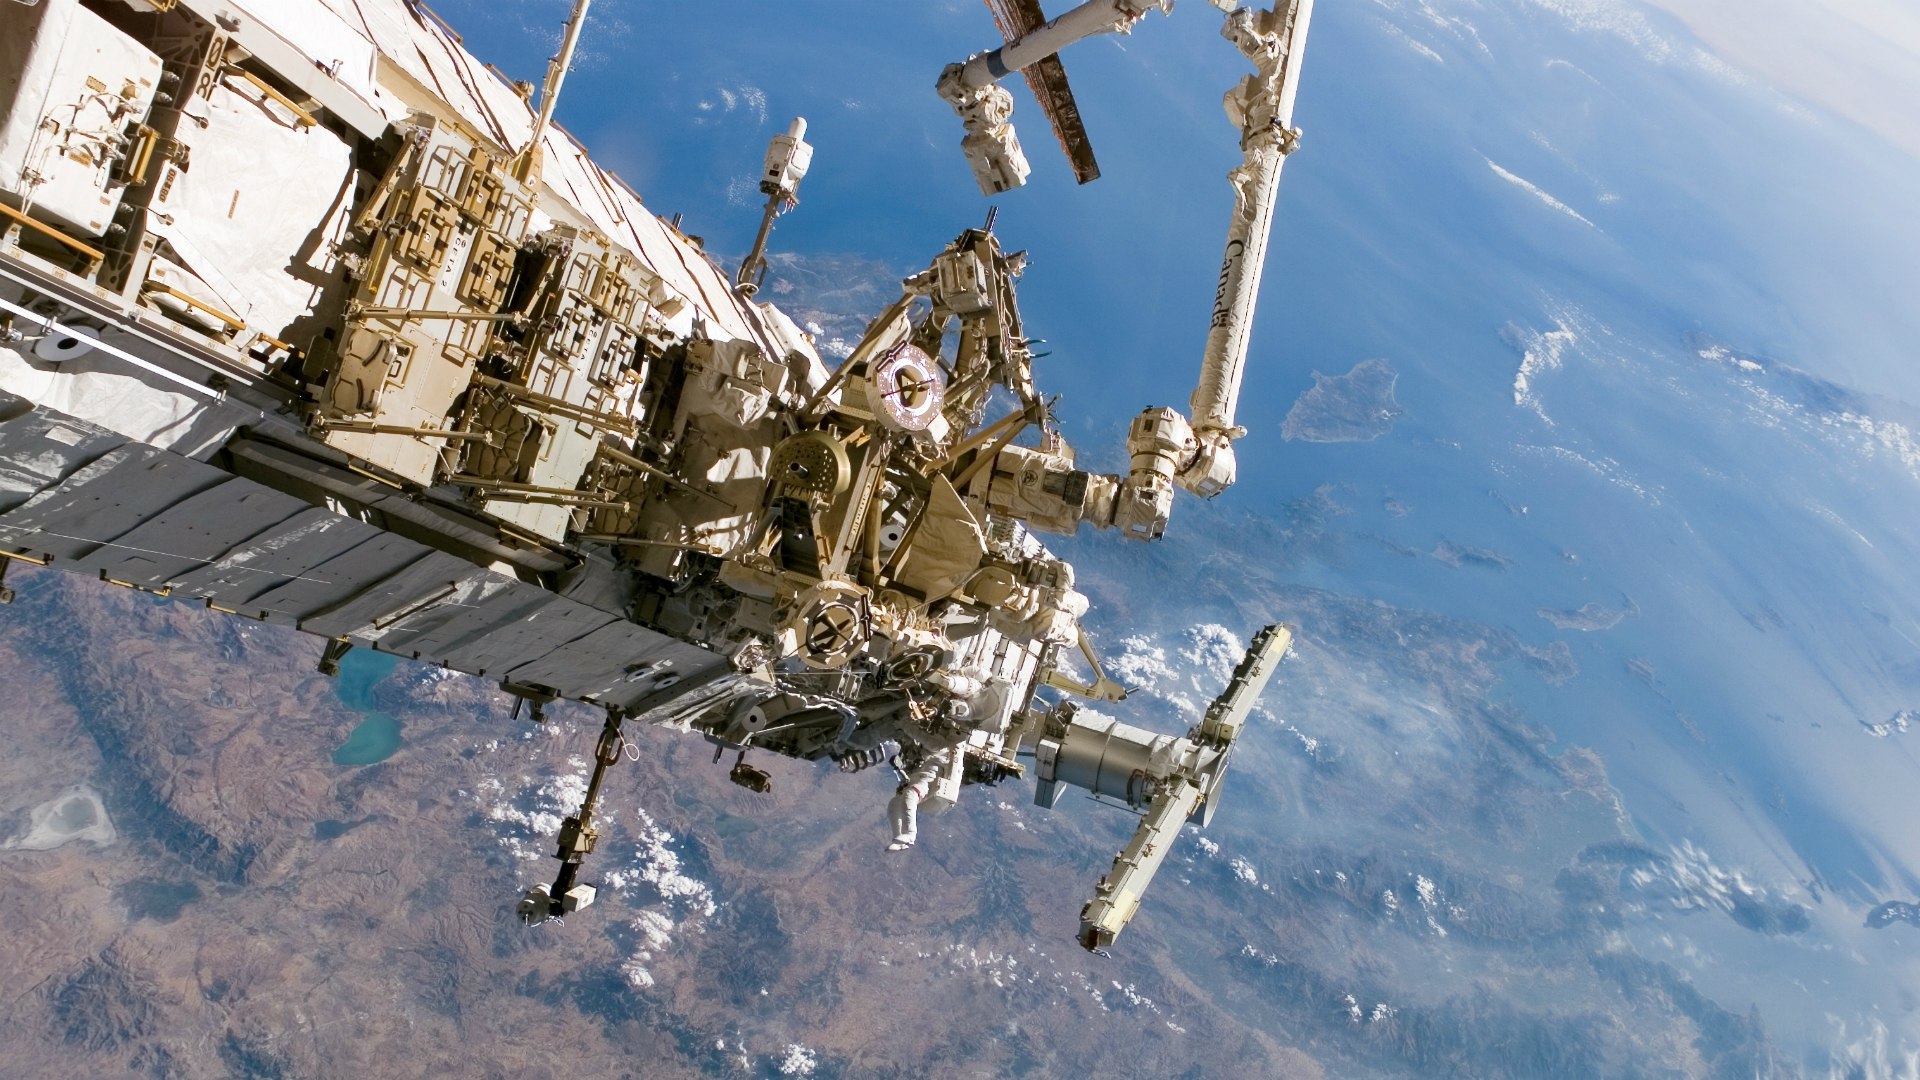 International Space Station In Orbit Wallpaper And Image